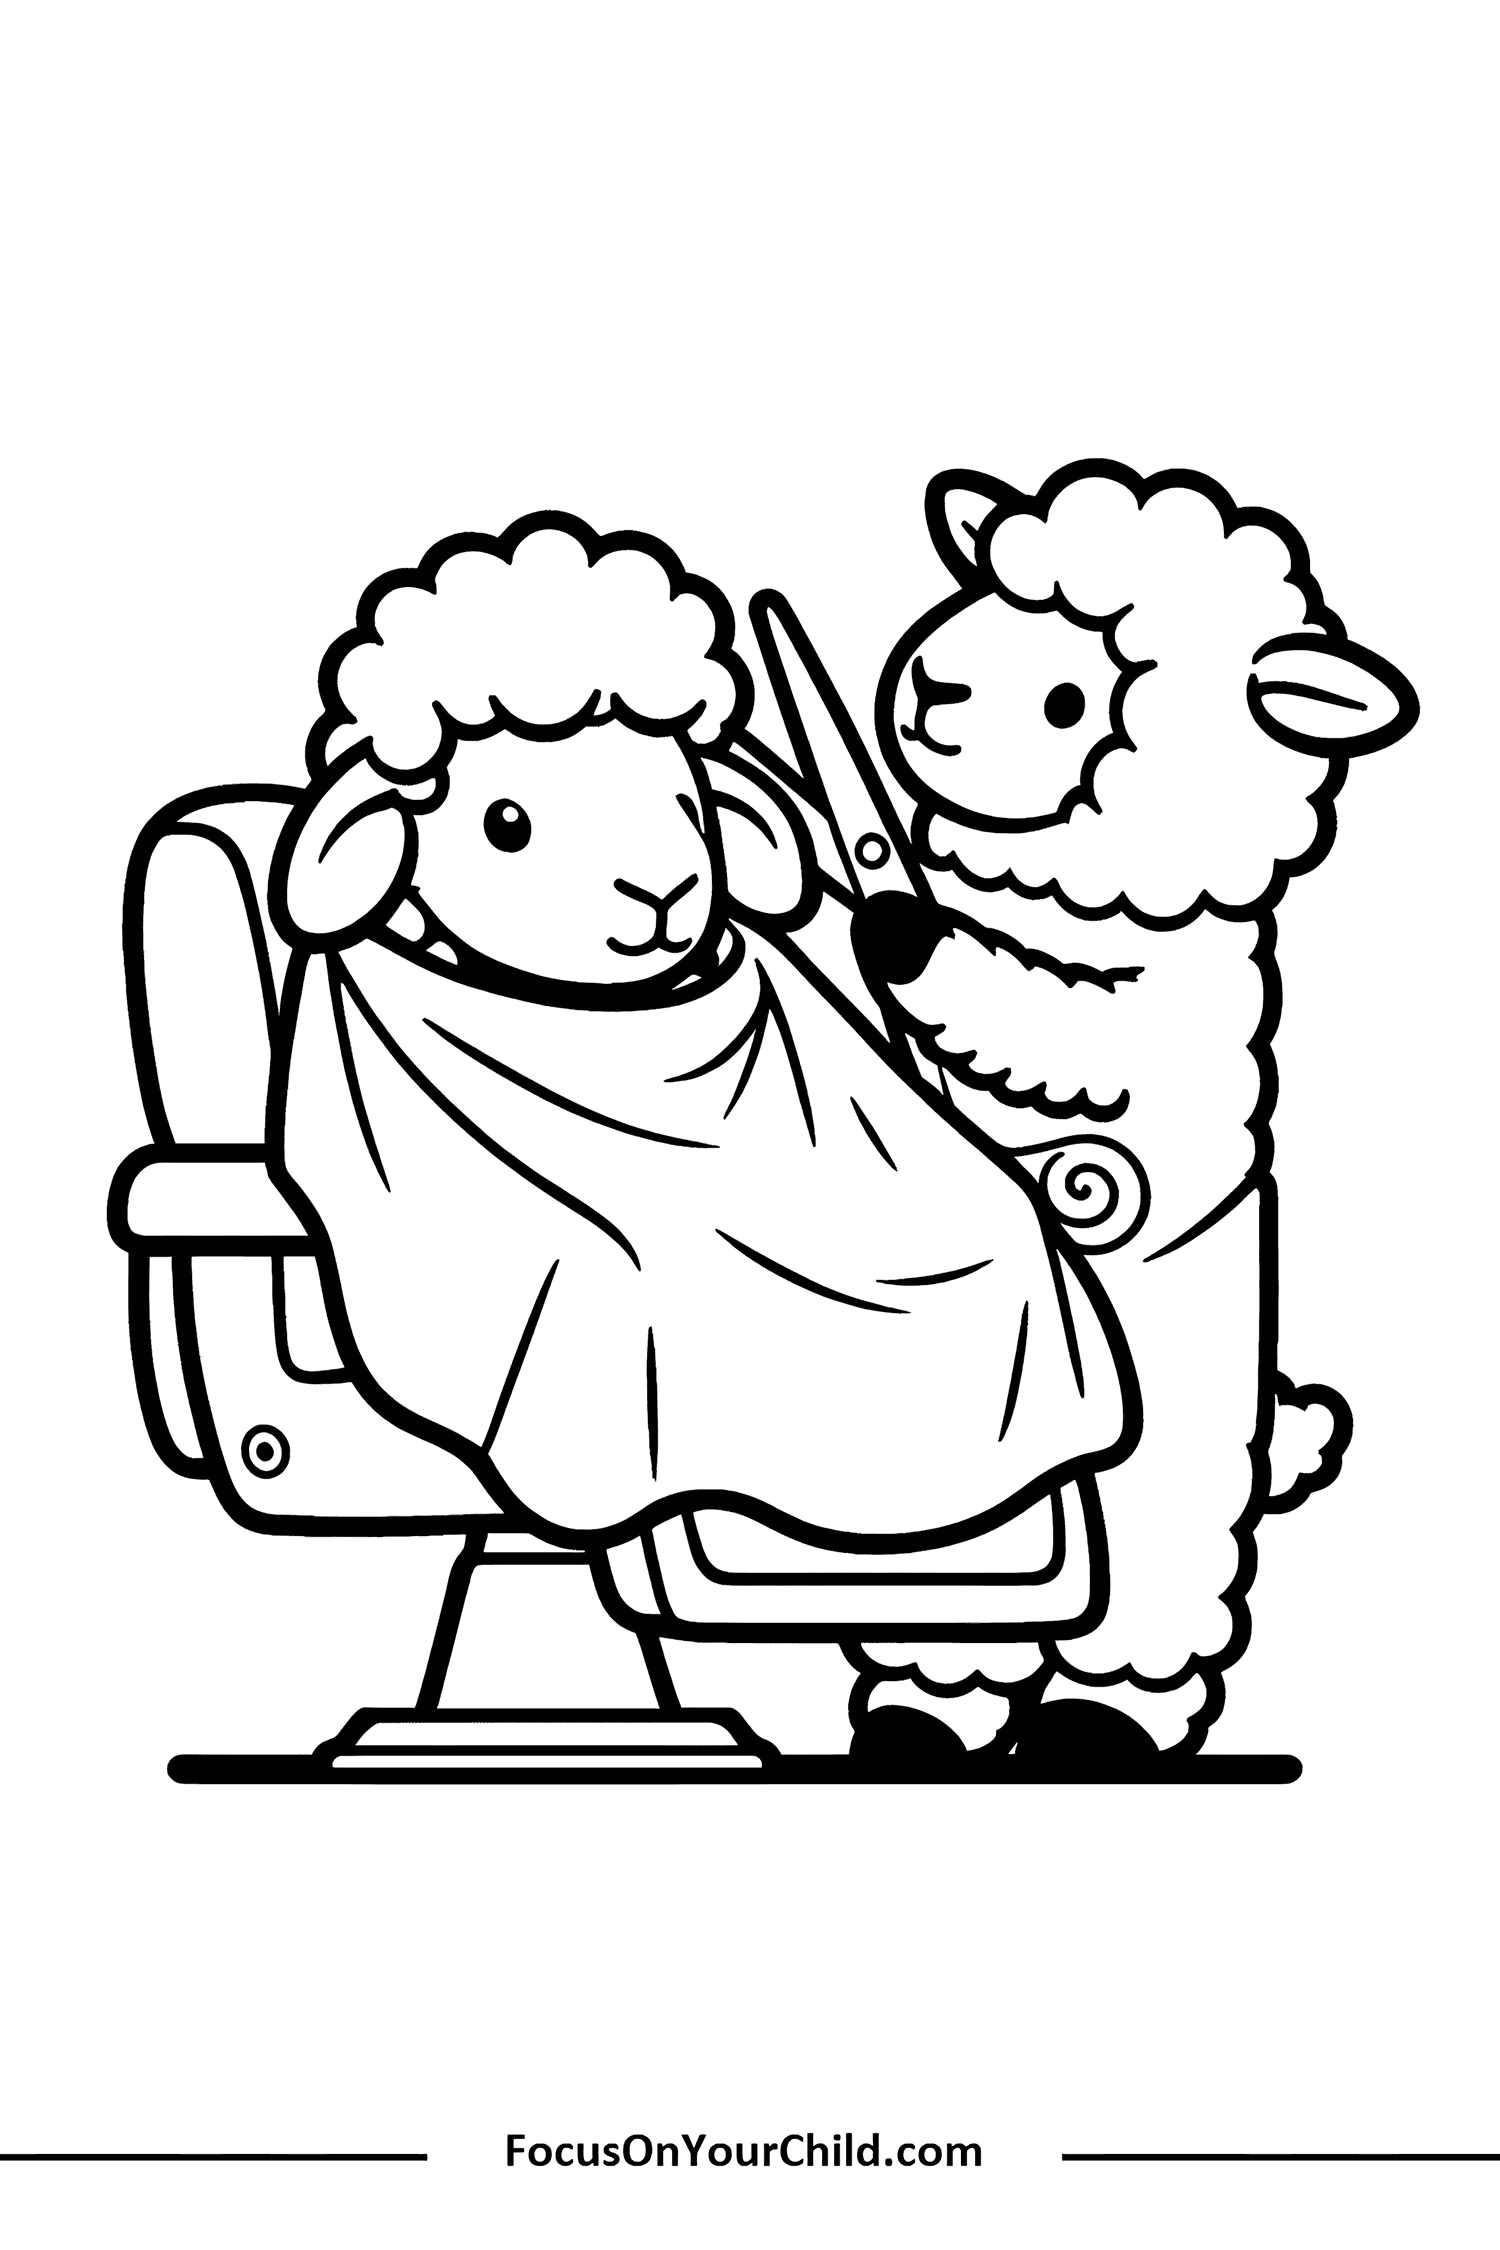 Whimsical sheep hairstyling session in a barber shop setting for childrens website.